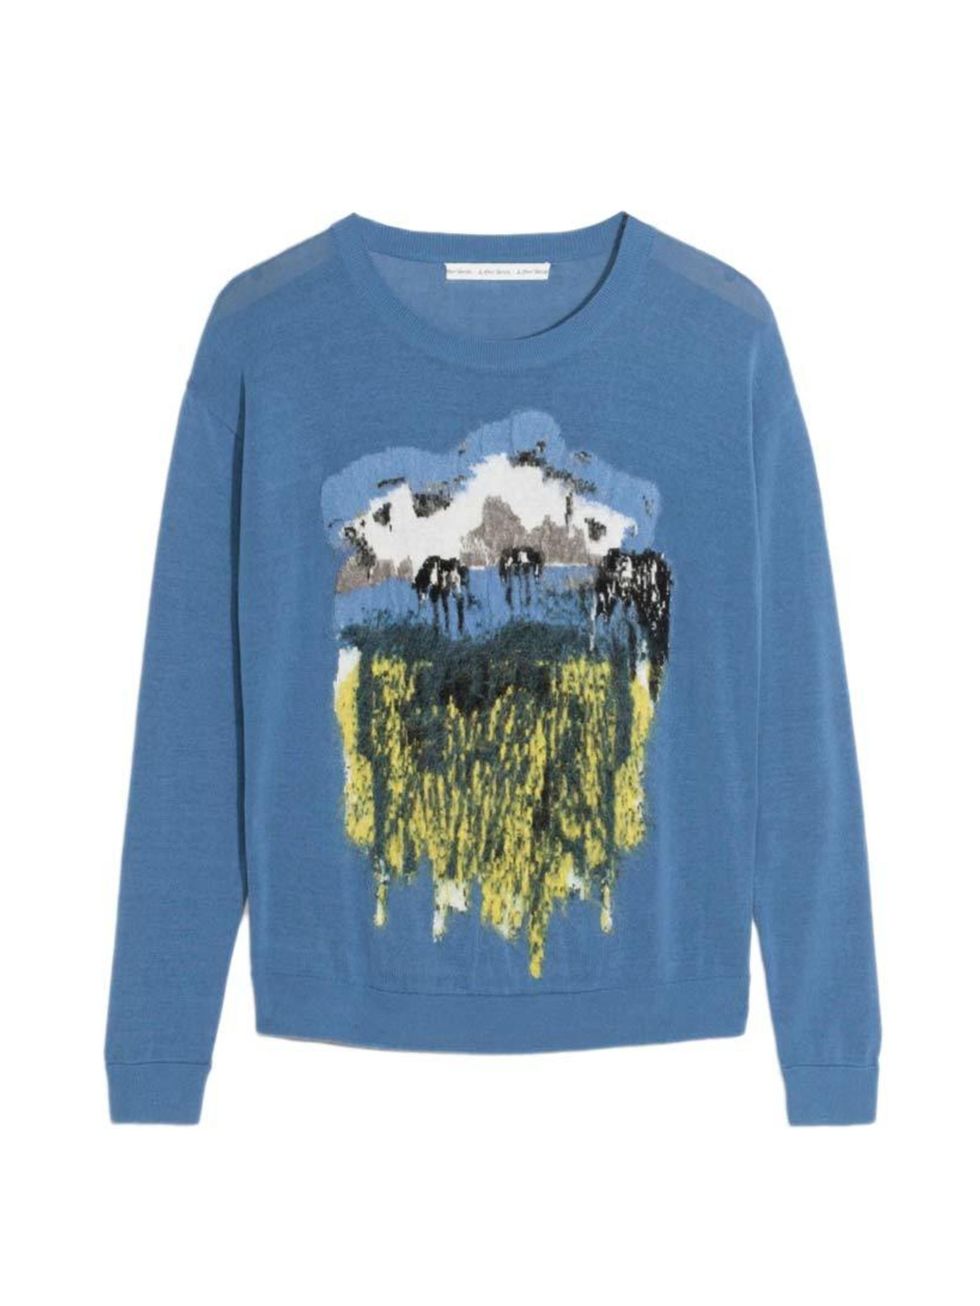 <p>A Heidi-esque alpine scene. Layer over a floral dress for an unexpected clash.</p>

<p><a href="http://www.stories.com/gb/New_in/All_new_in/Mountain_Applique_Sweater/108773759-108689723.1" target="_blank">& Other Stories</a> jumper, £55</p>